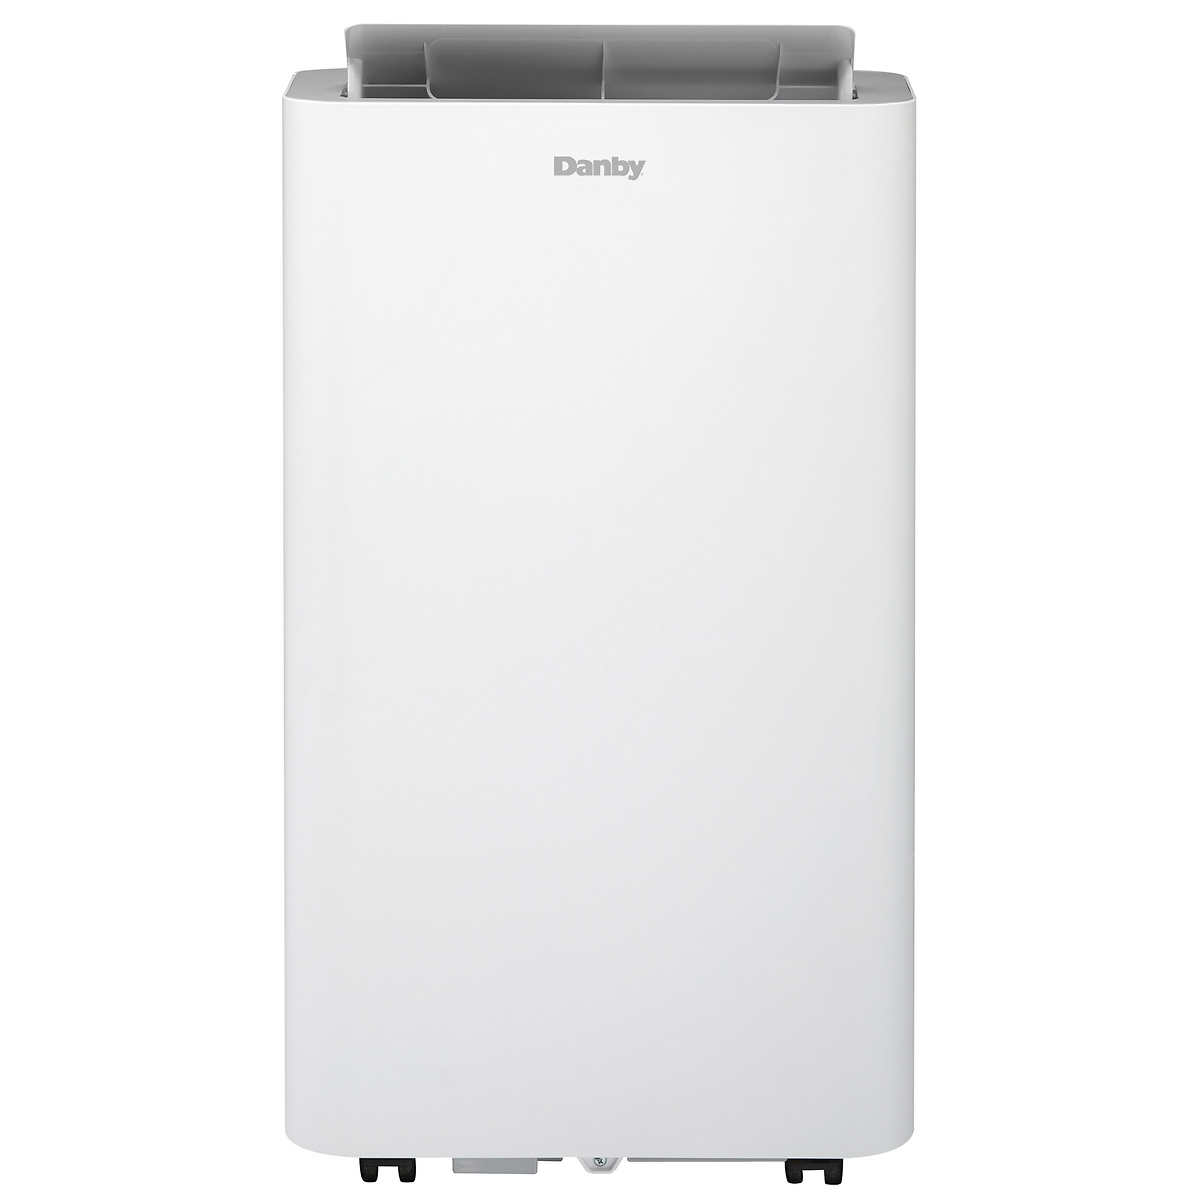 Danby 12 000 Btu 3 In 1 Portable Air Conditioner With Silencer And Wireless Connect Costco